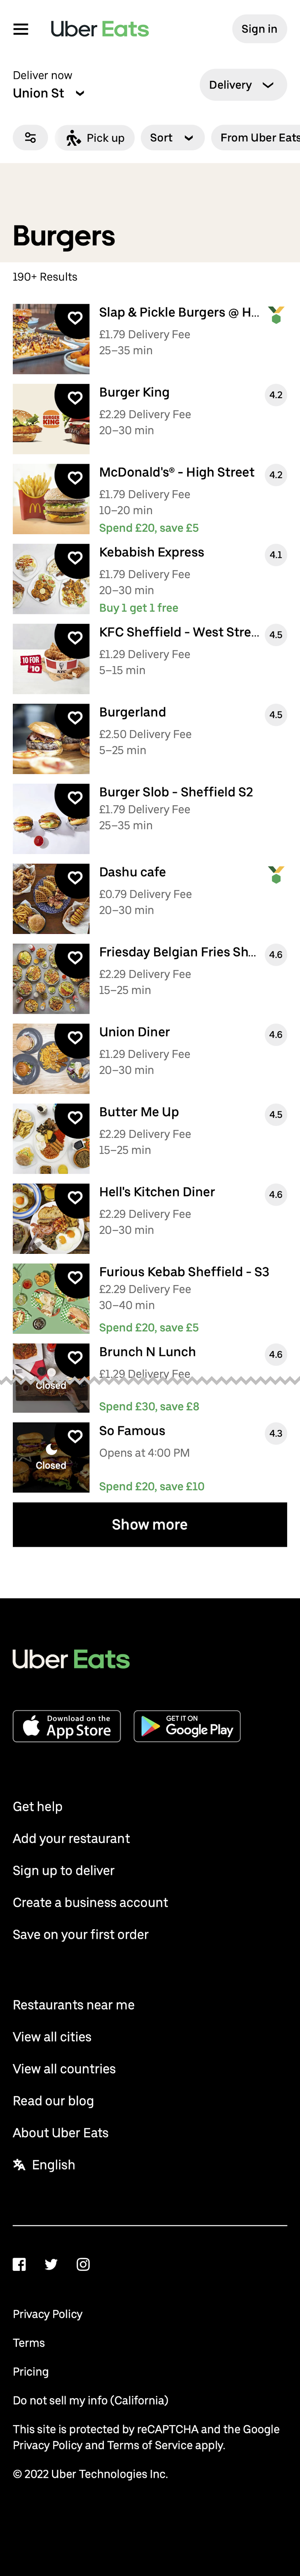 Extending the scope of Uber Eats- a UX Case Study